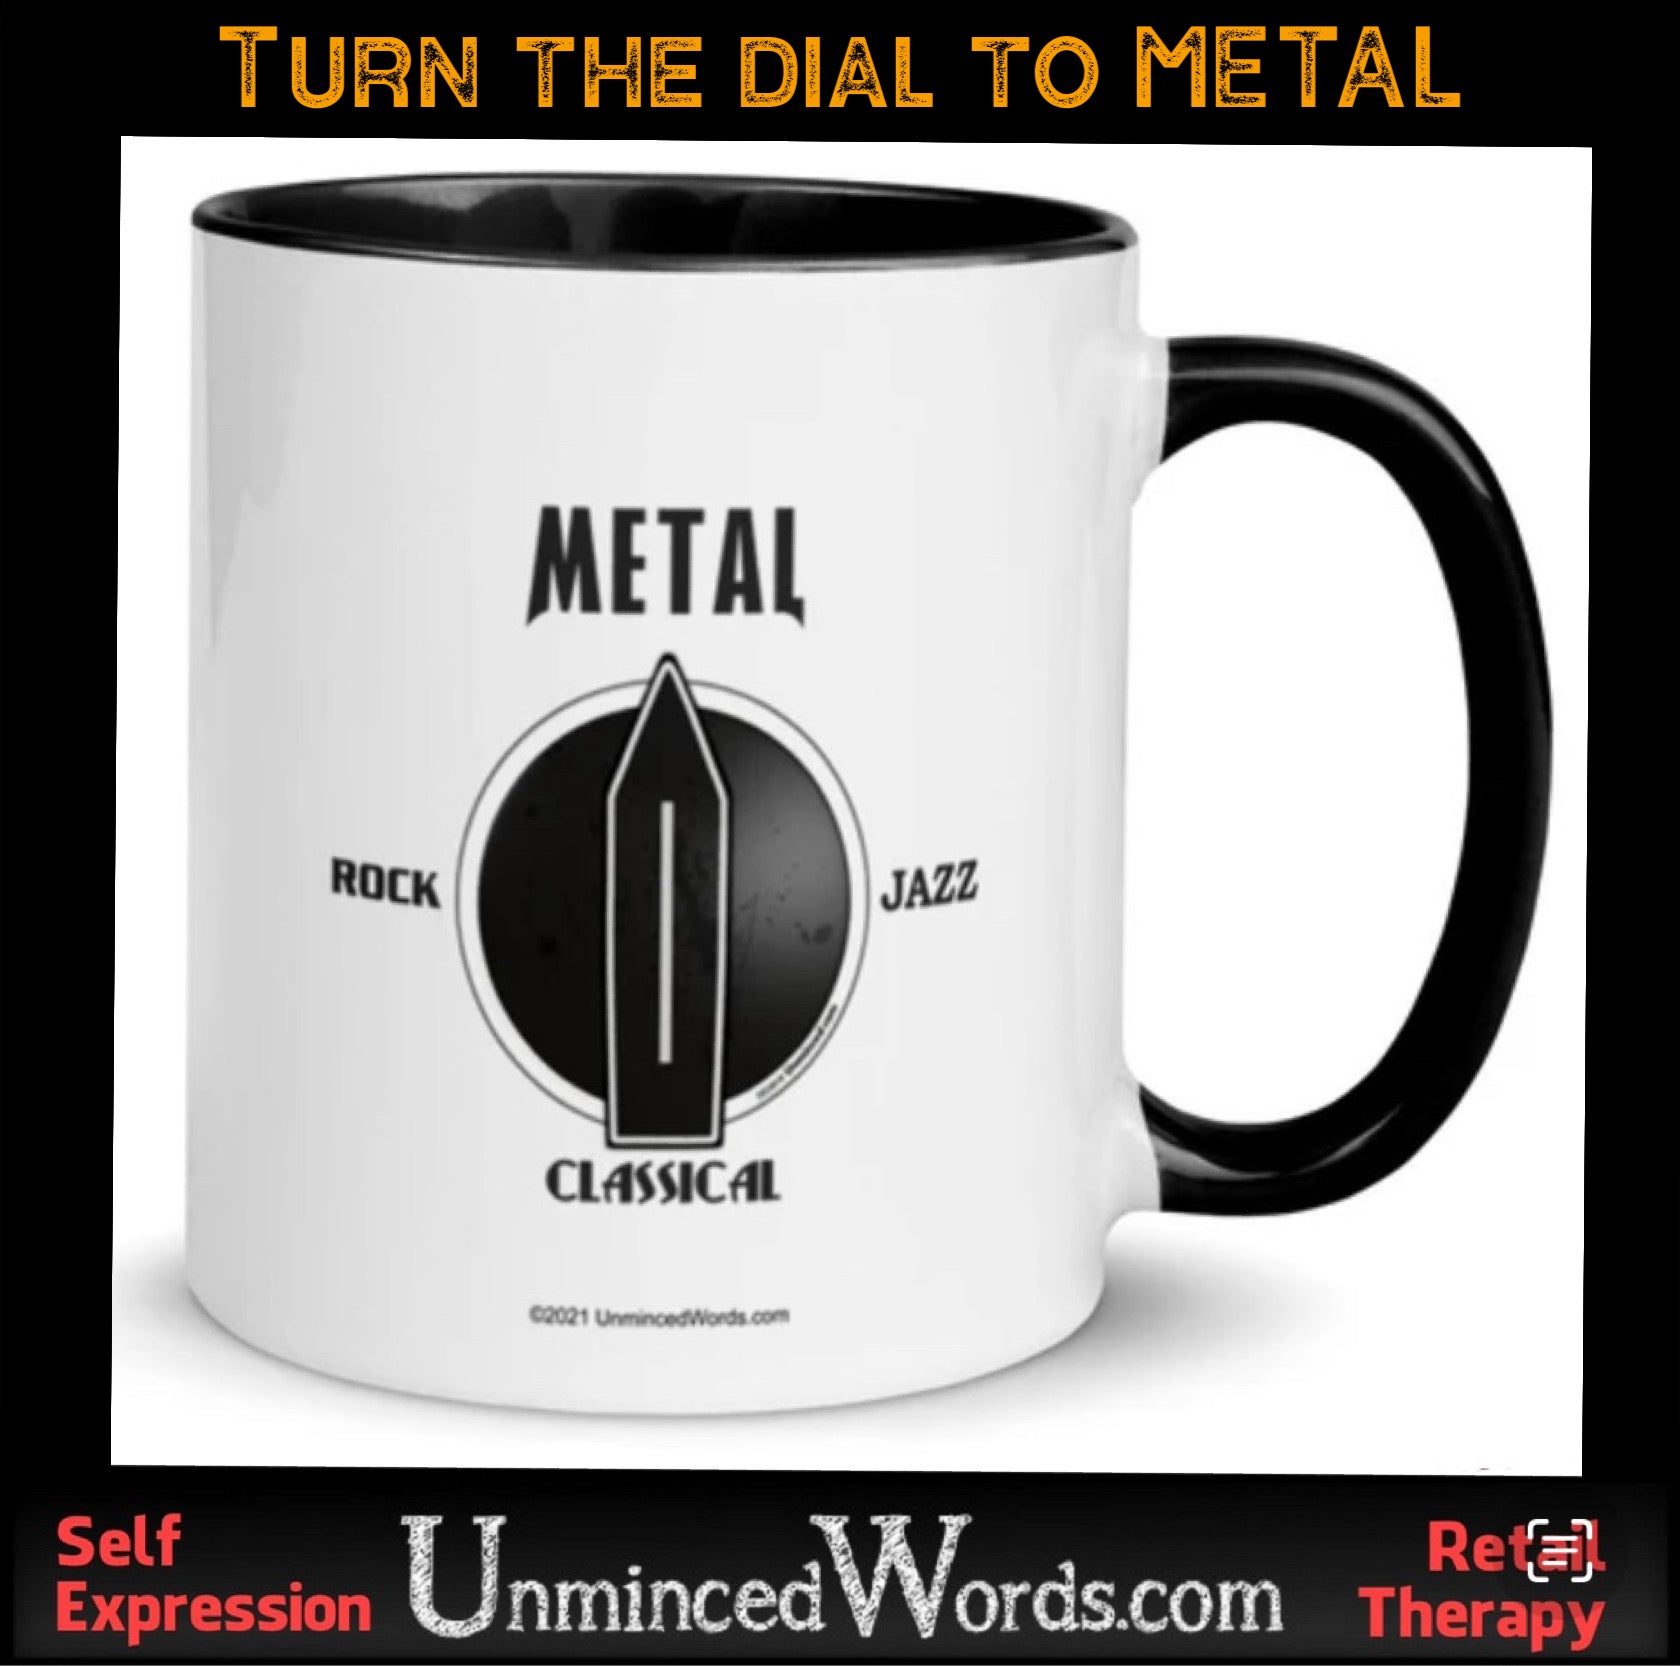 Turn the dial to Metal